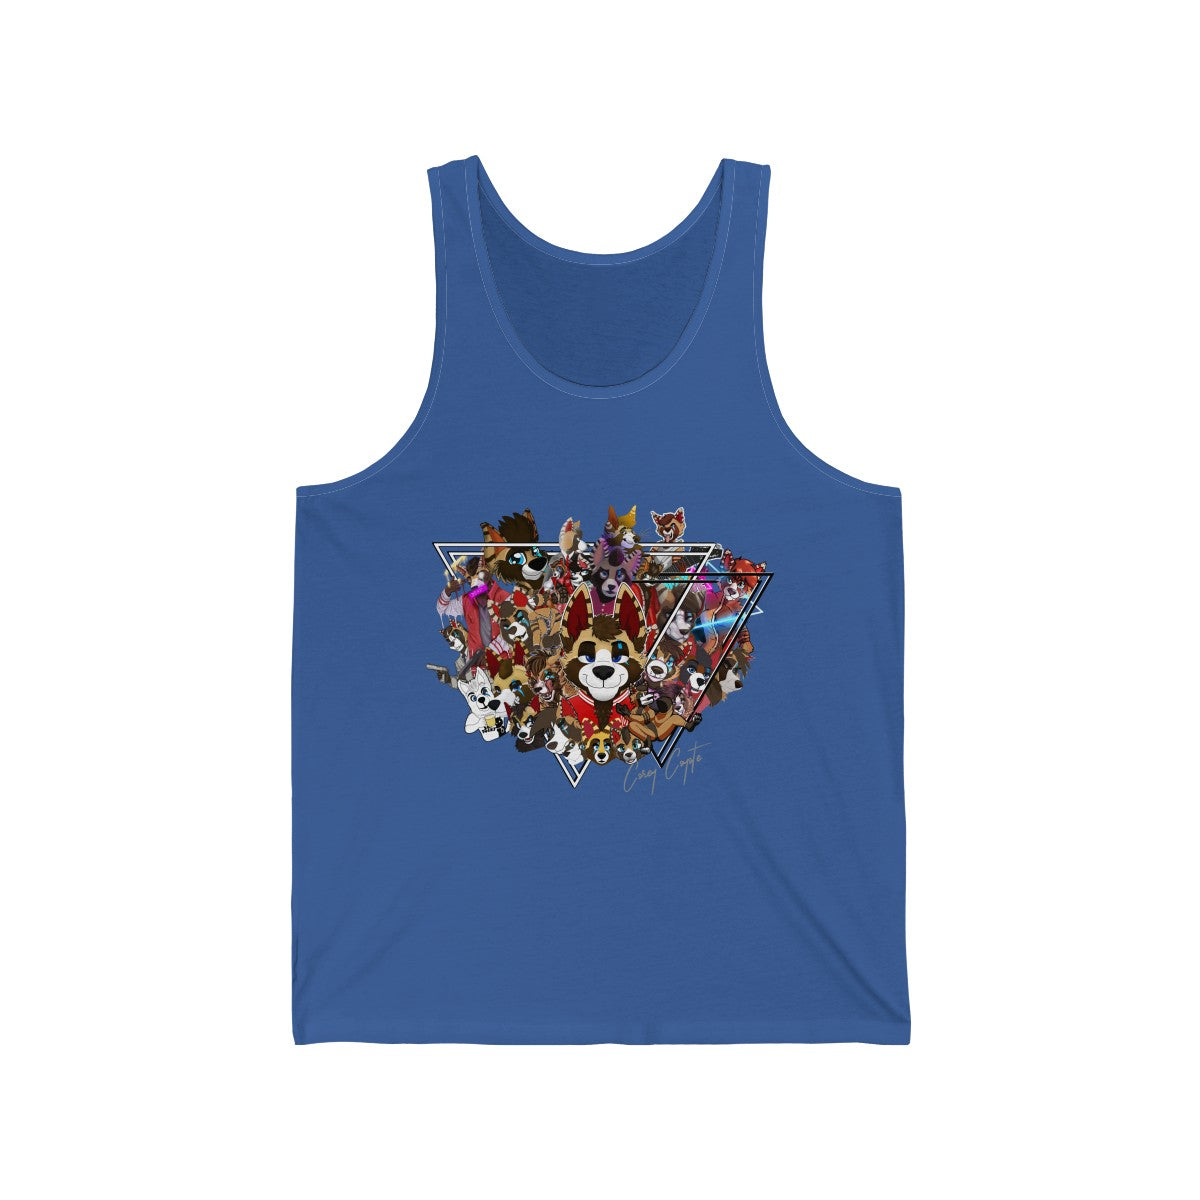 For The Fans - Tank Top Tank Top Corey Coyote Royal Blue XS 